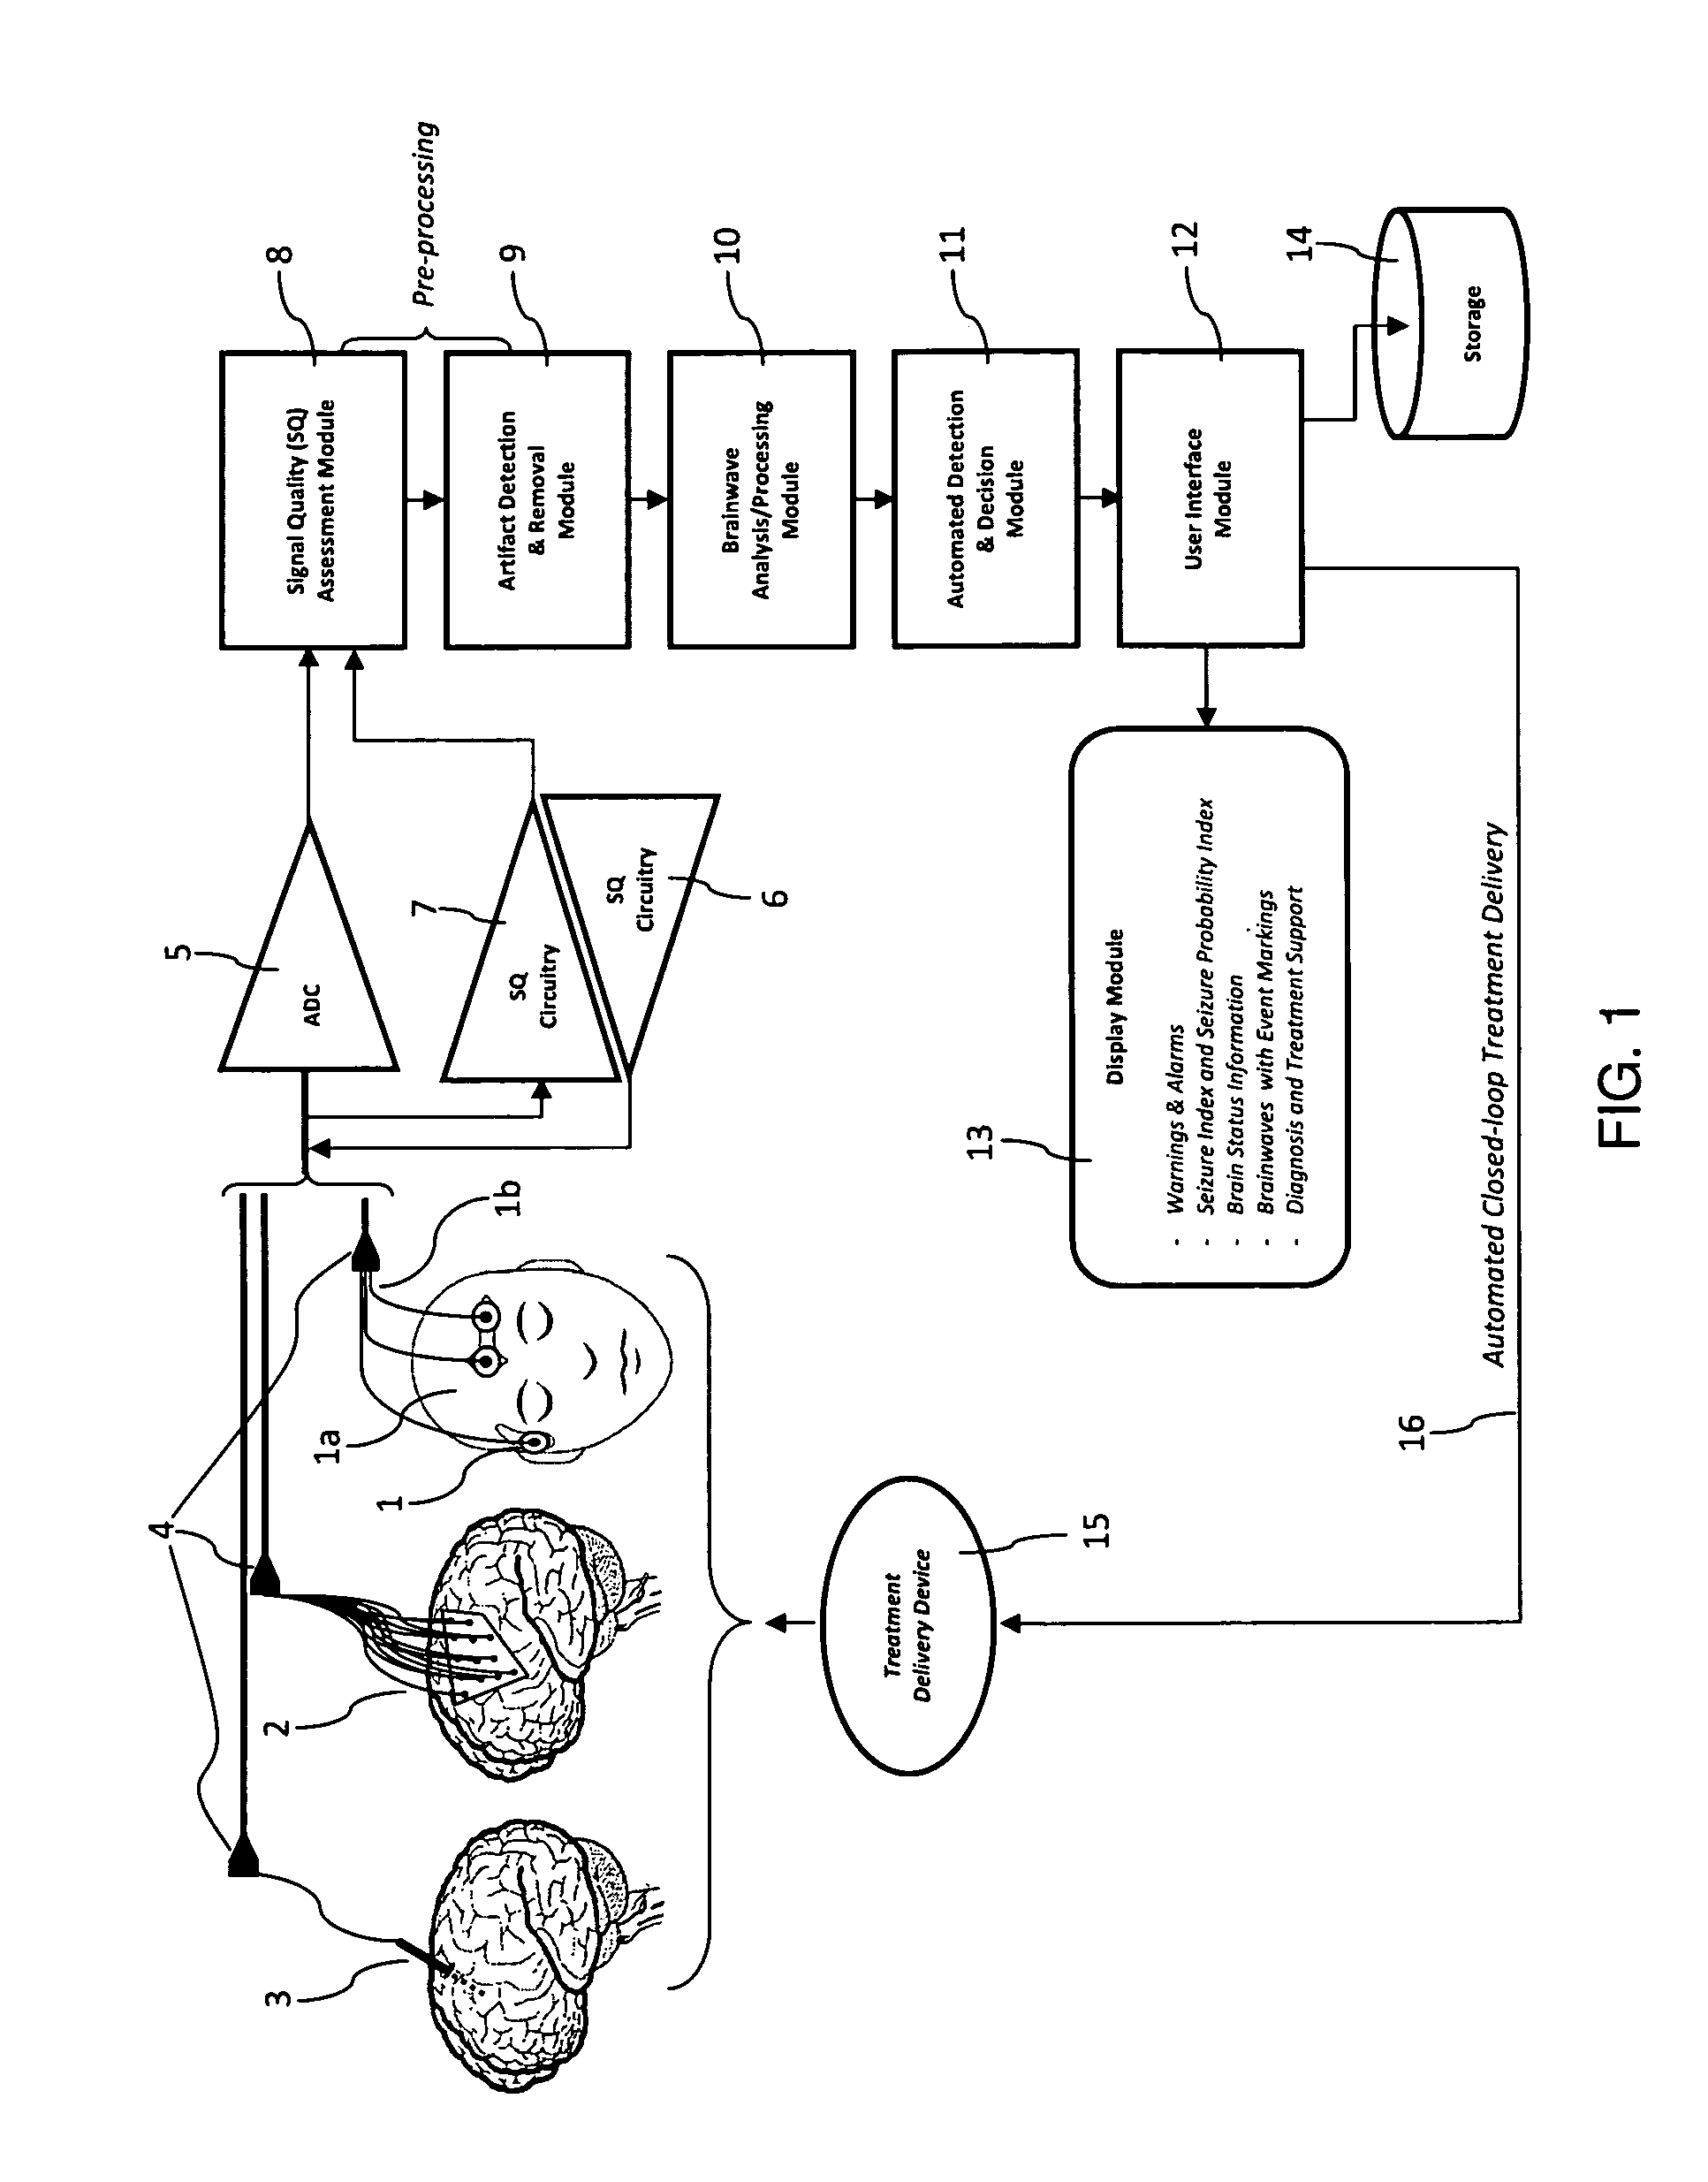 Method for amplifying abnormal pattern signal in observed brain activity of a subject for diagnosis or treatment